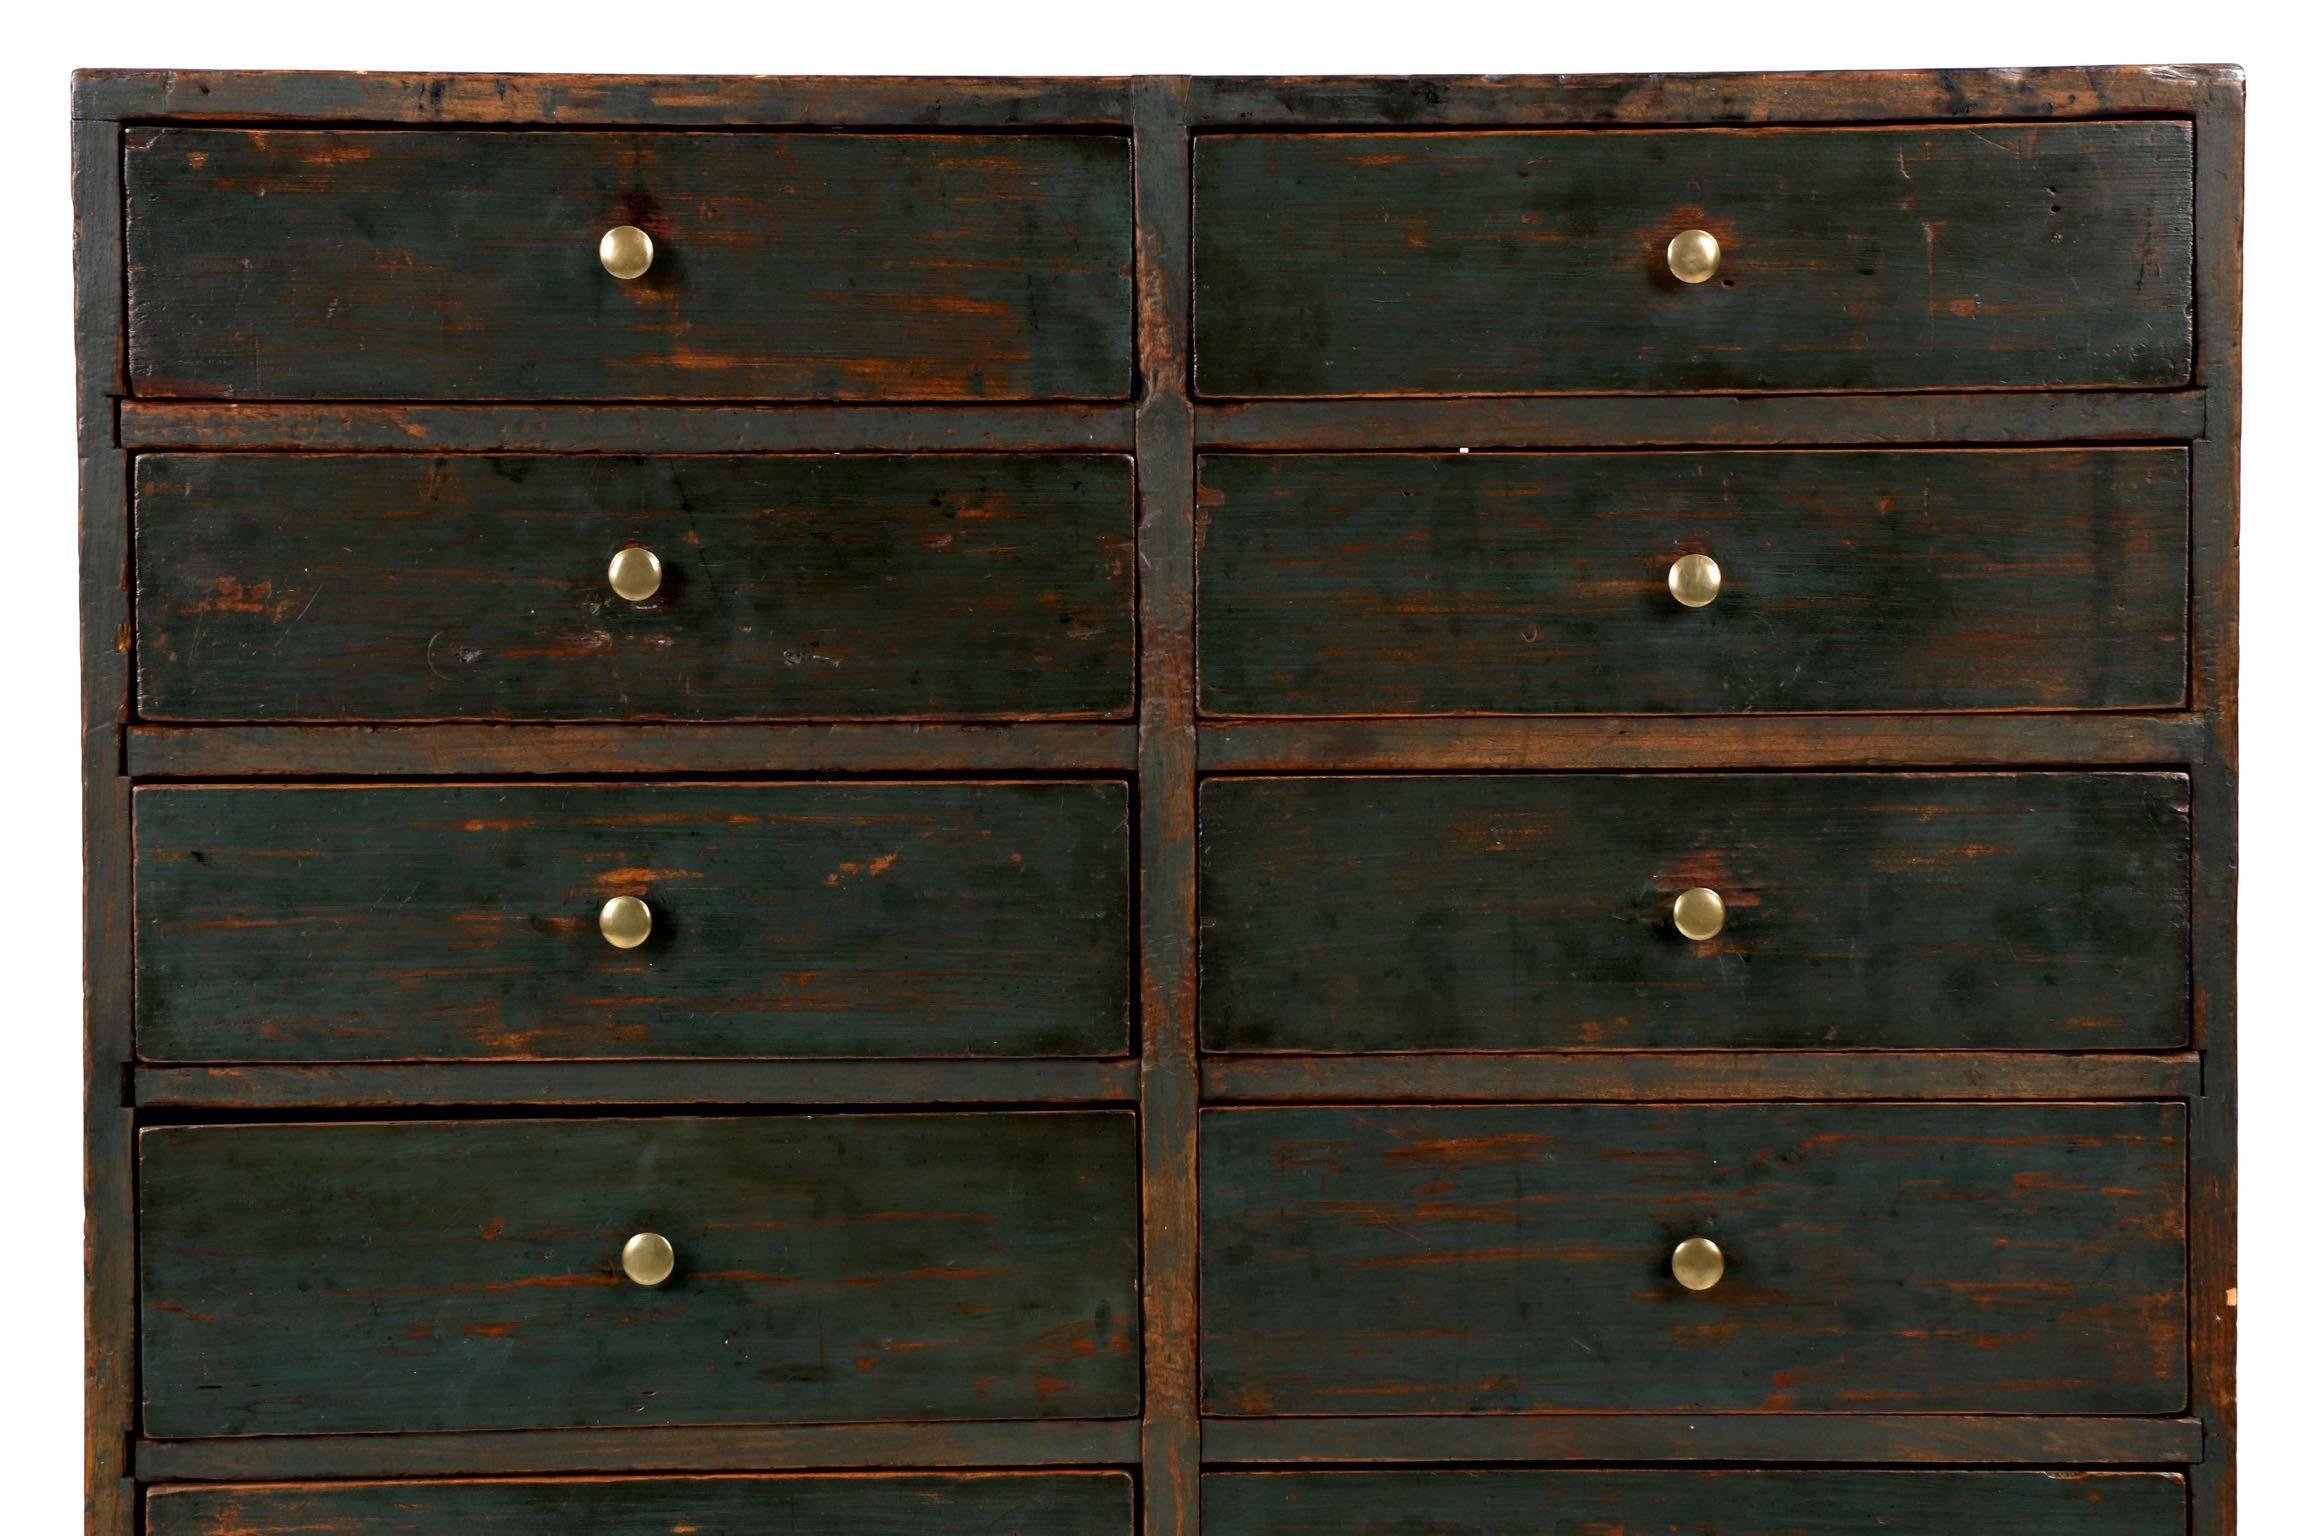 Primitive American Scrubbed Blue Painted Dovetailed Pine Apothecary Cabinet, 19th Century